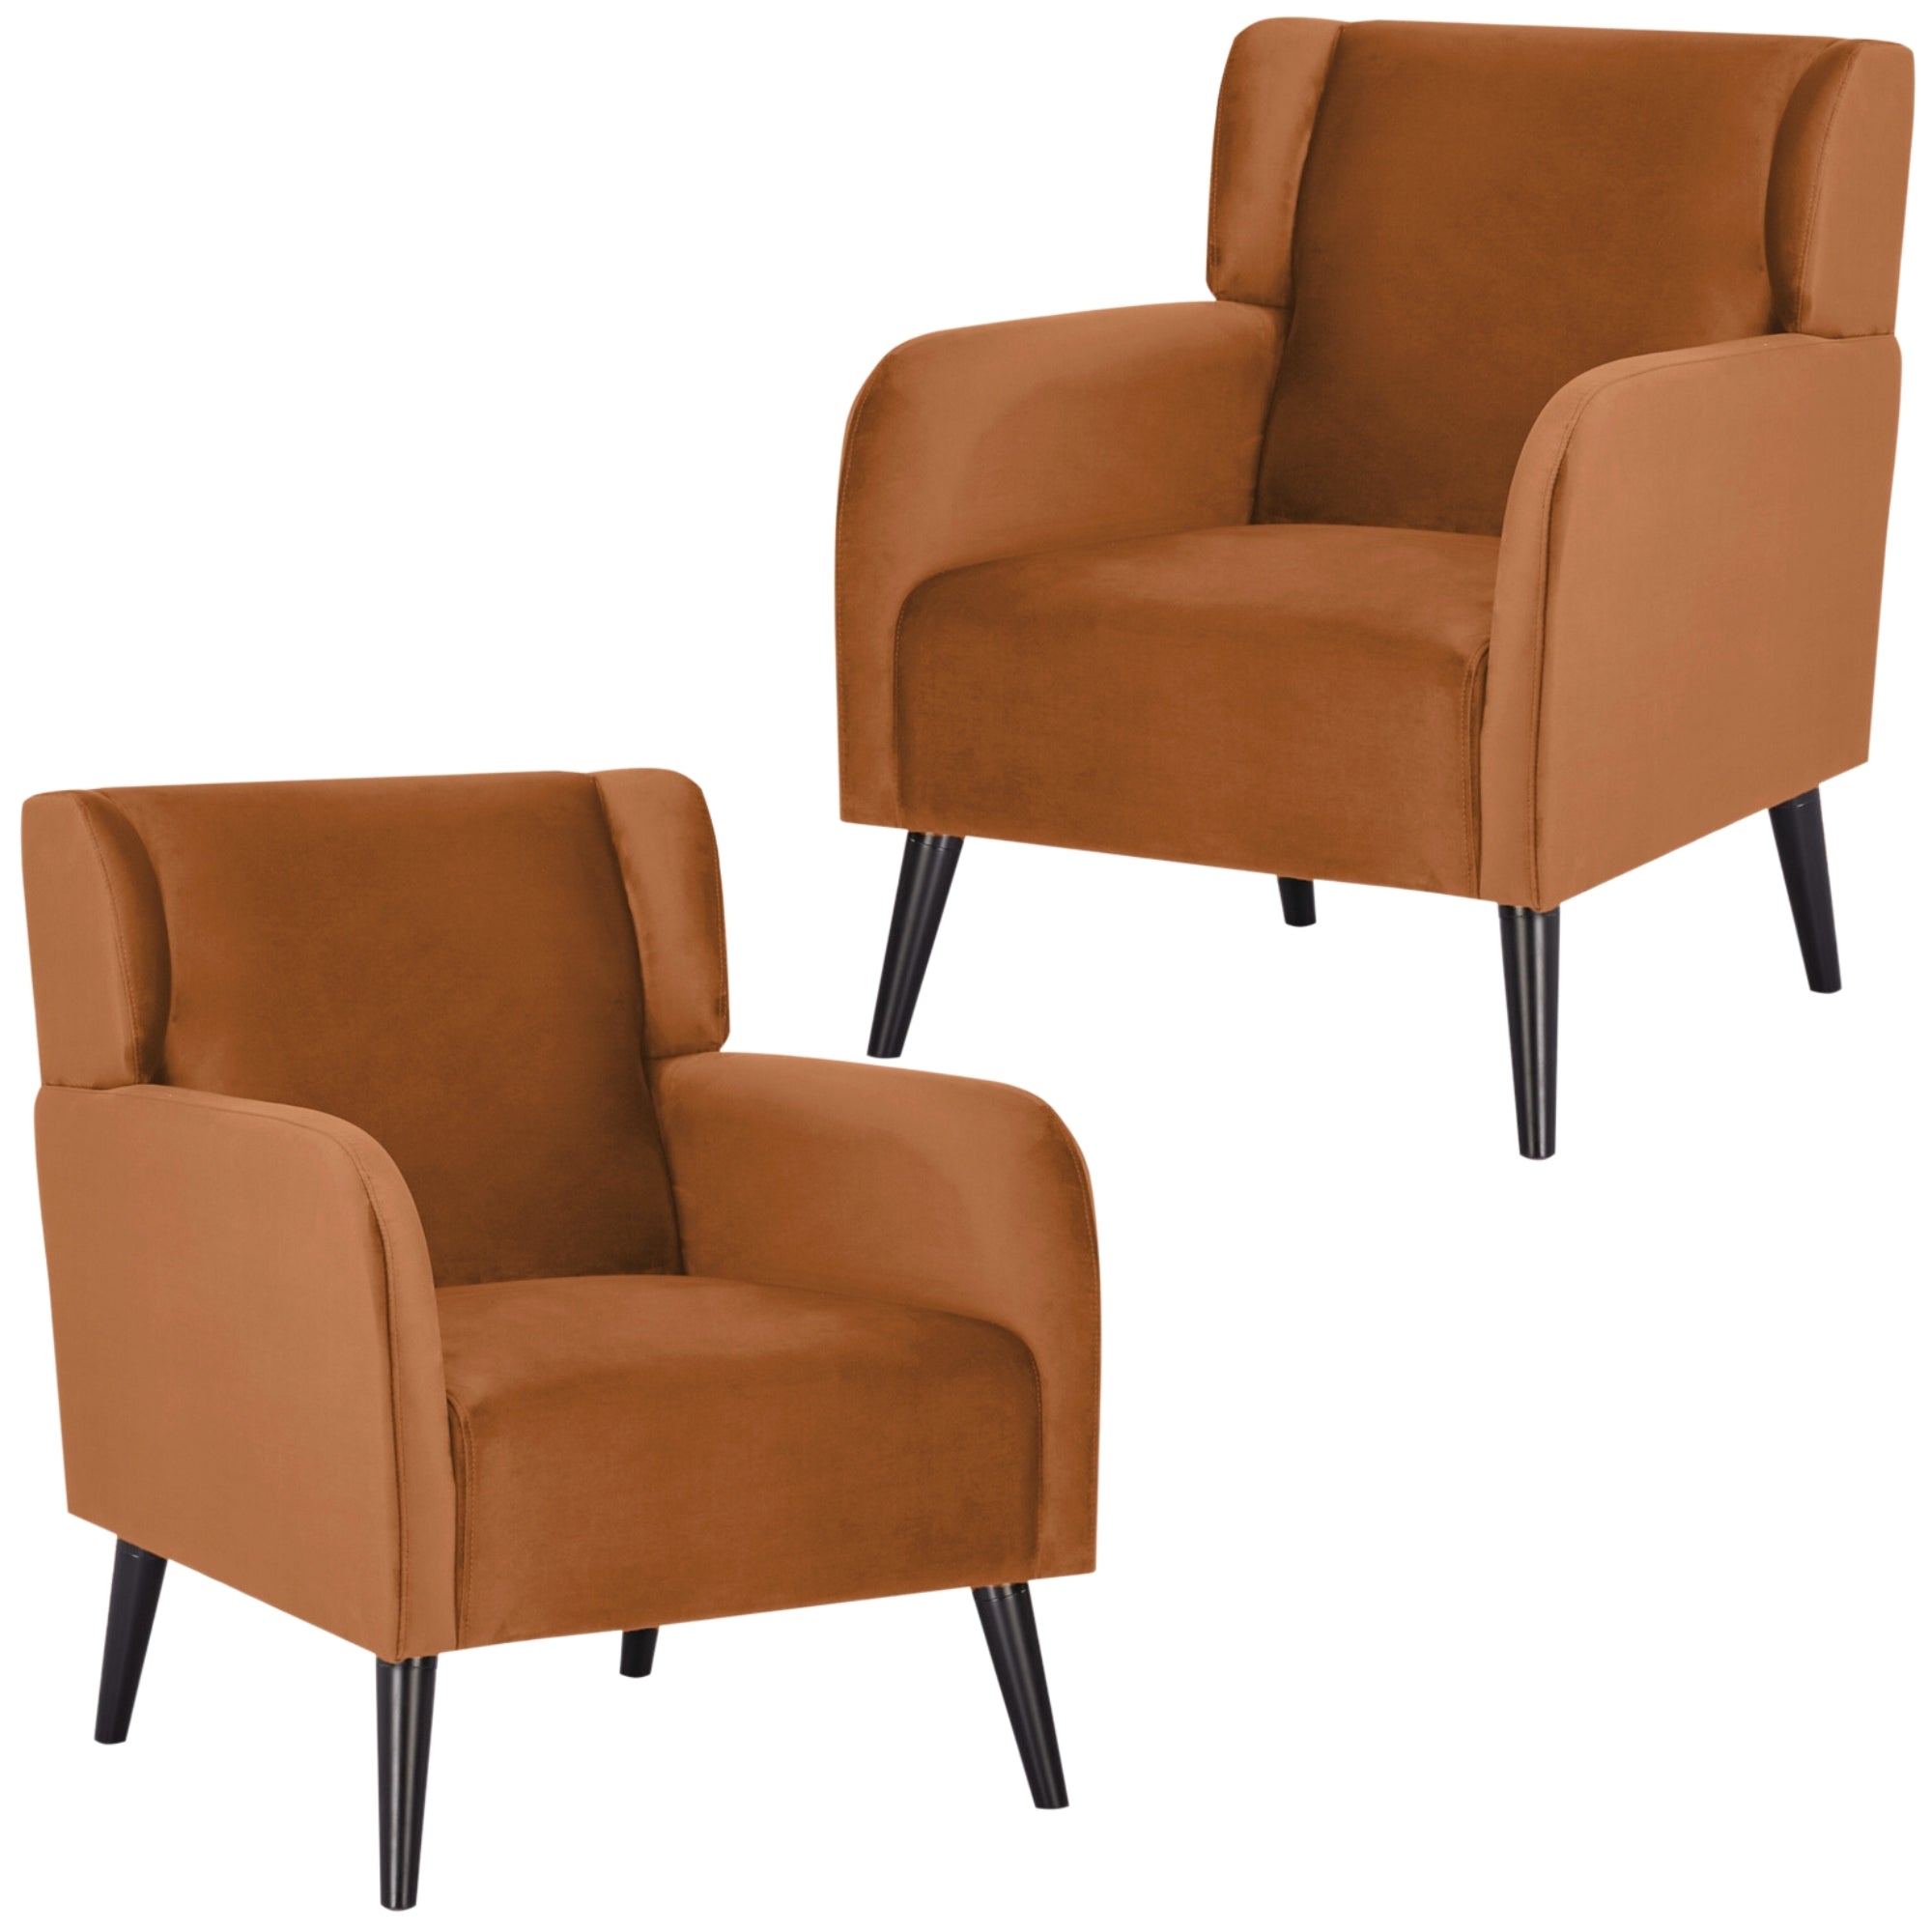 Orange 2pc Plush Upholstered Accent Arm Chairs, Scandinavian Style